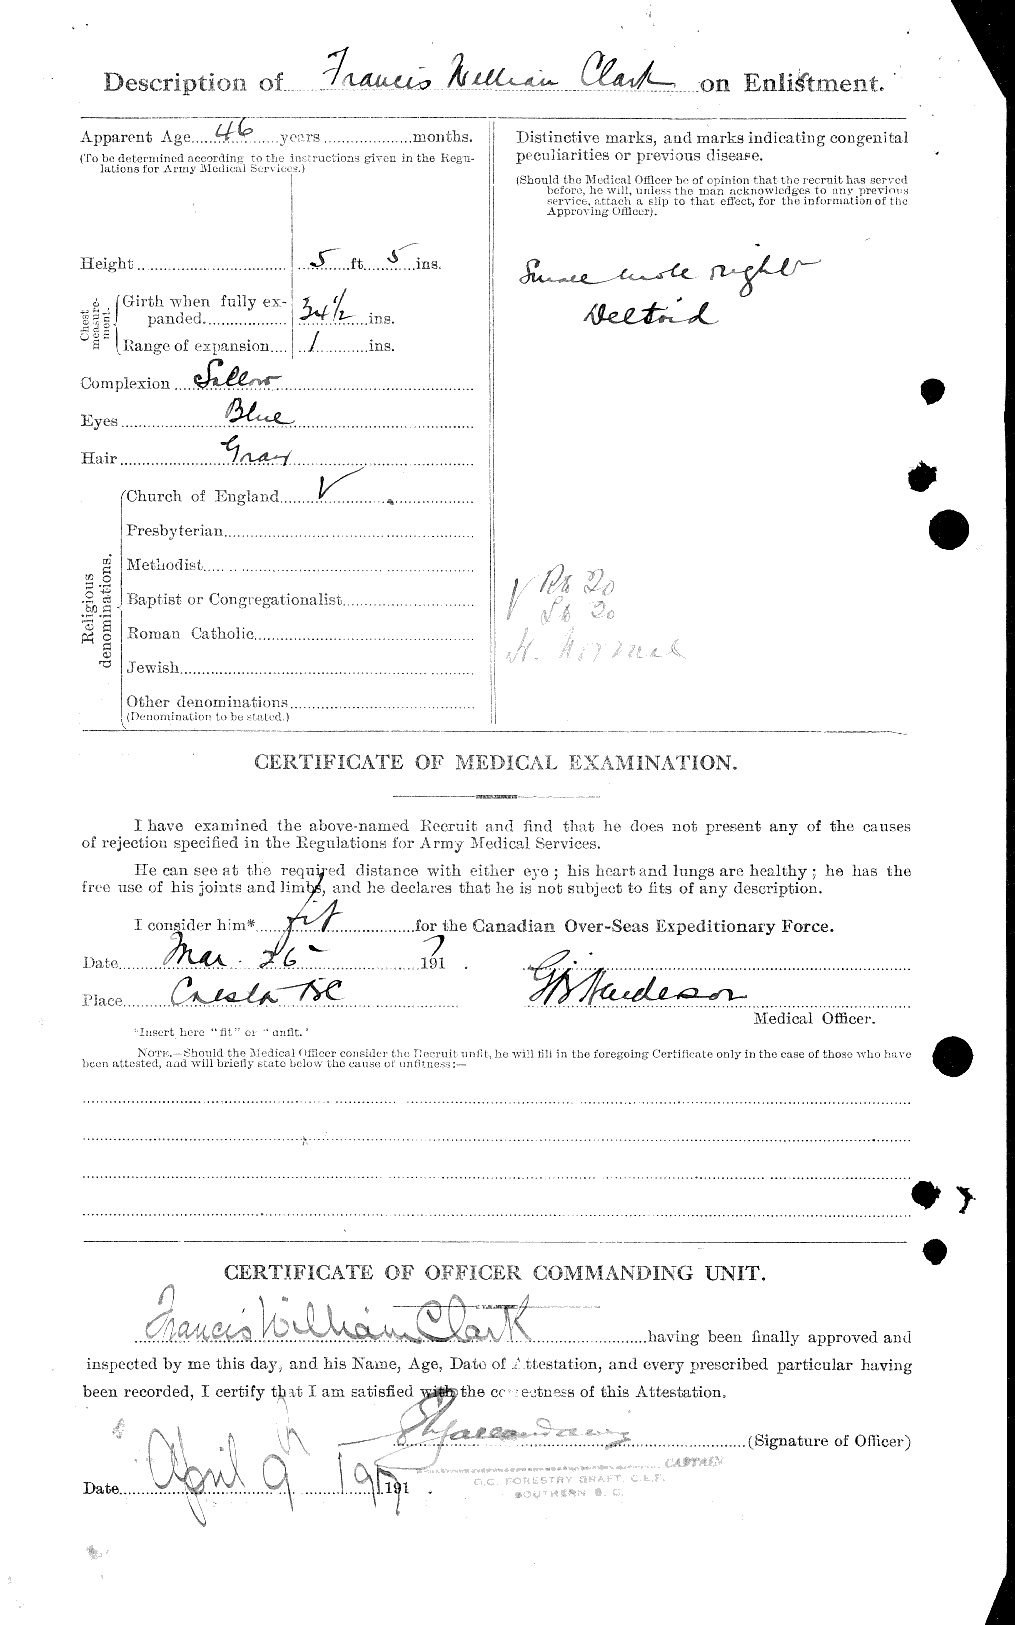 Personnel Records of the First World War - CEF 024307b